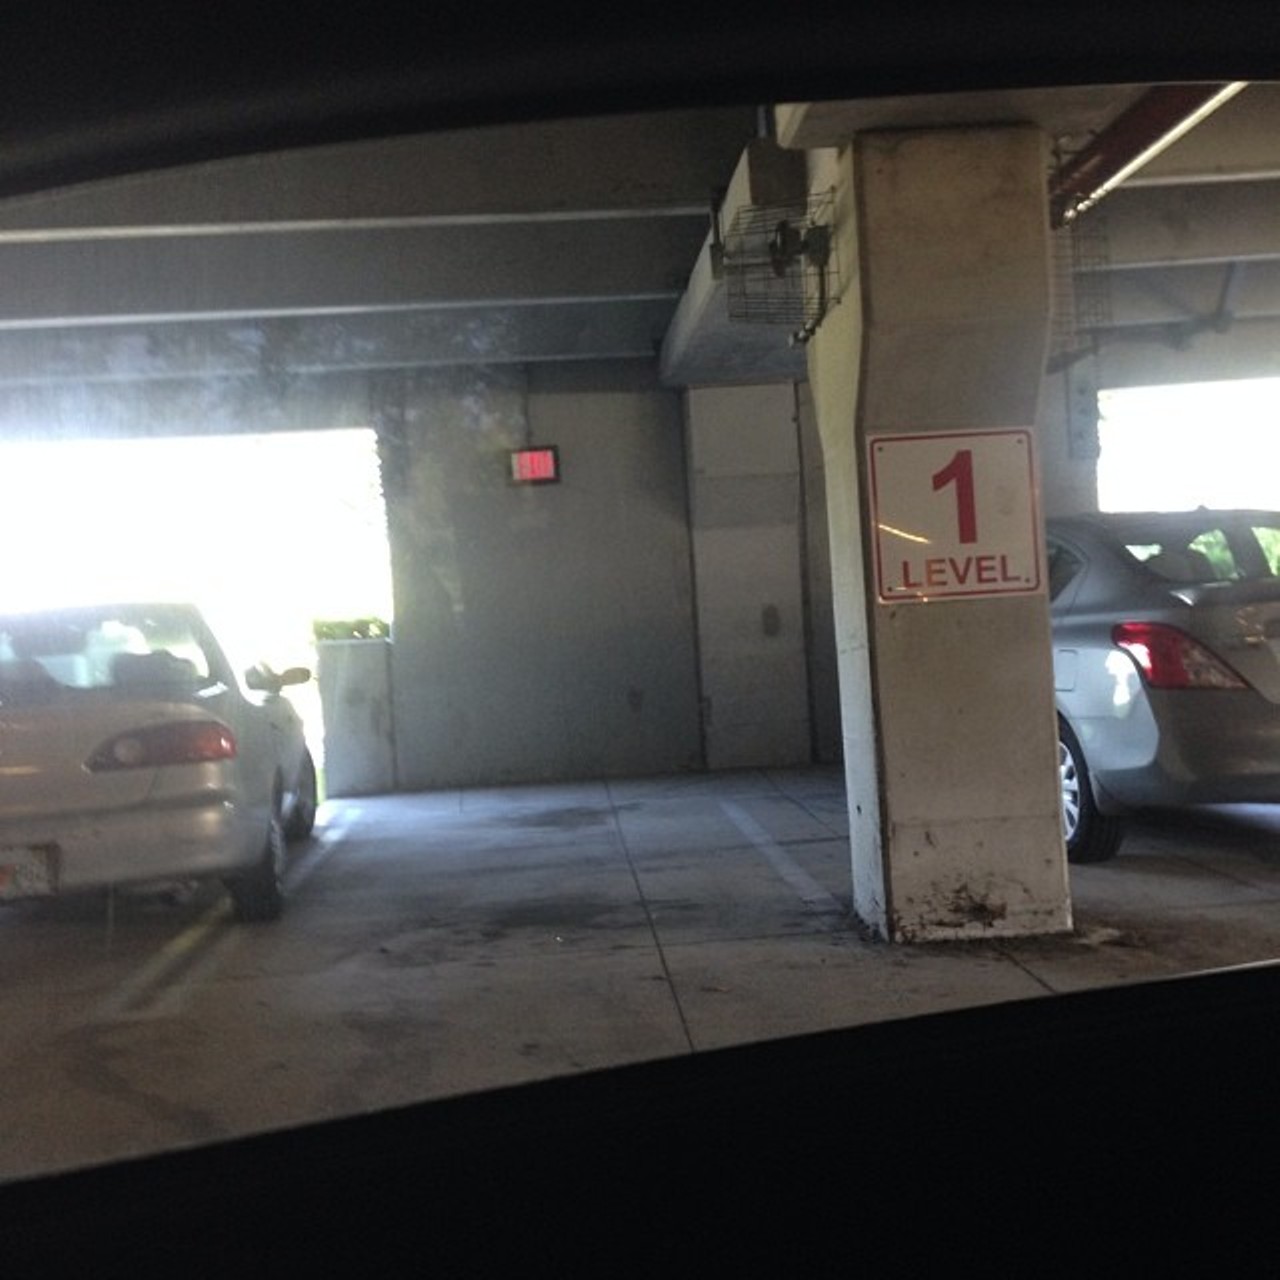 You should have to take a parking exam before you get accepted to UCF.
"I found a parking spot! Oh wait, someone's already in it..."
Photo via kalopez127